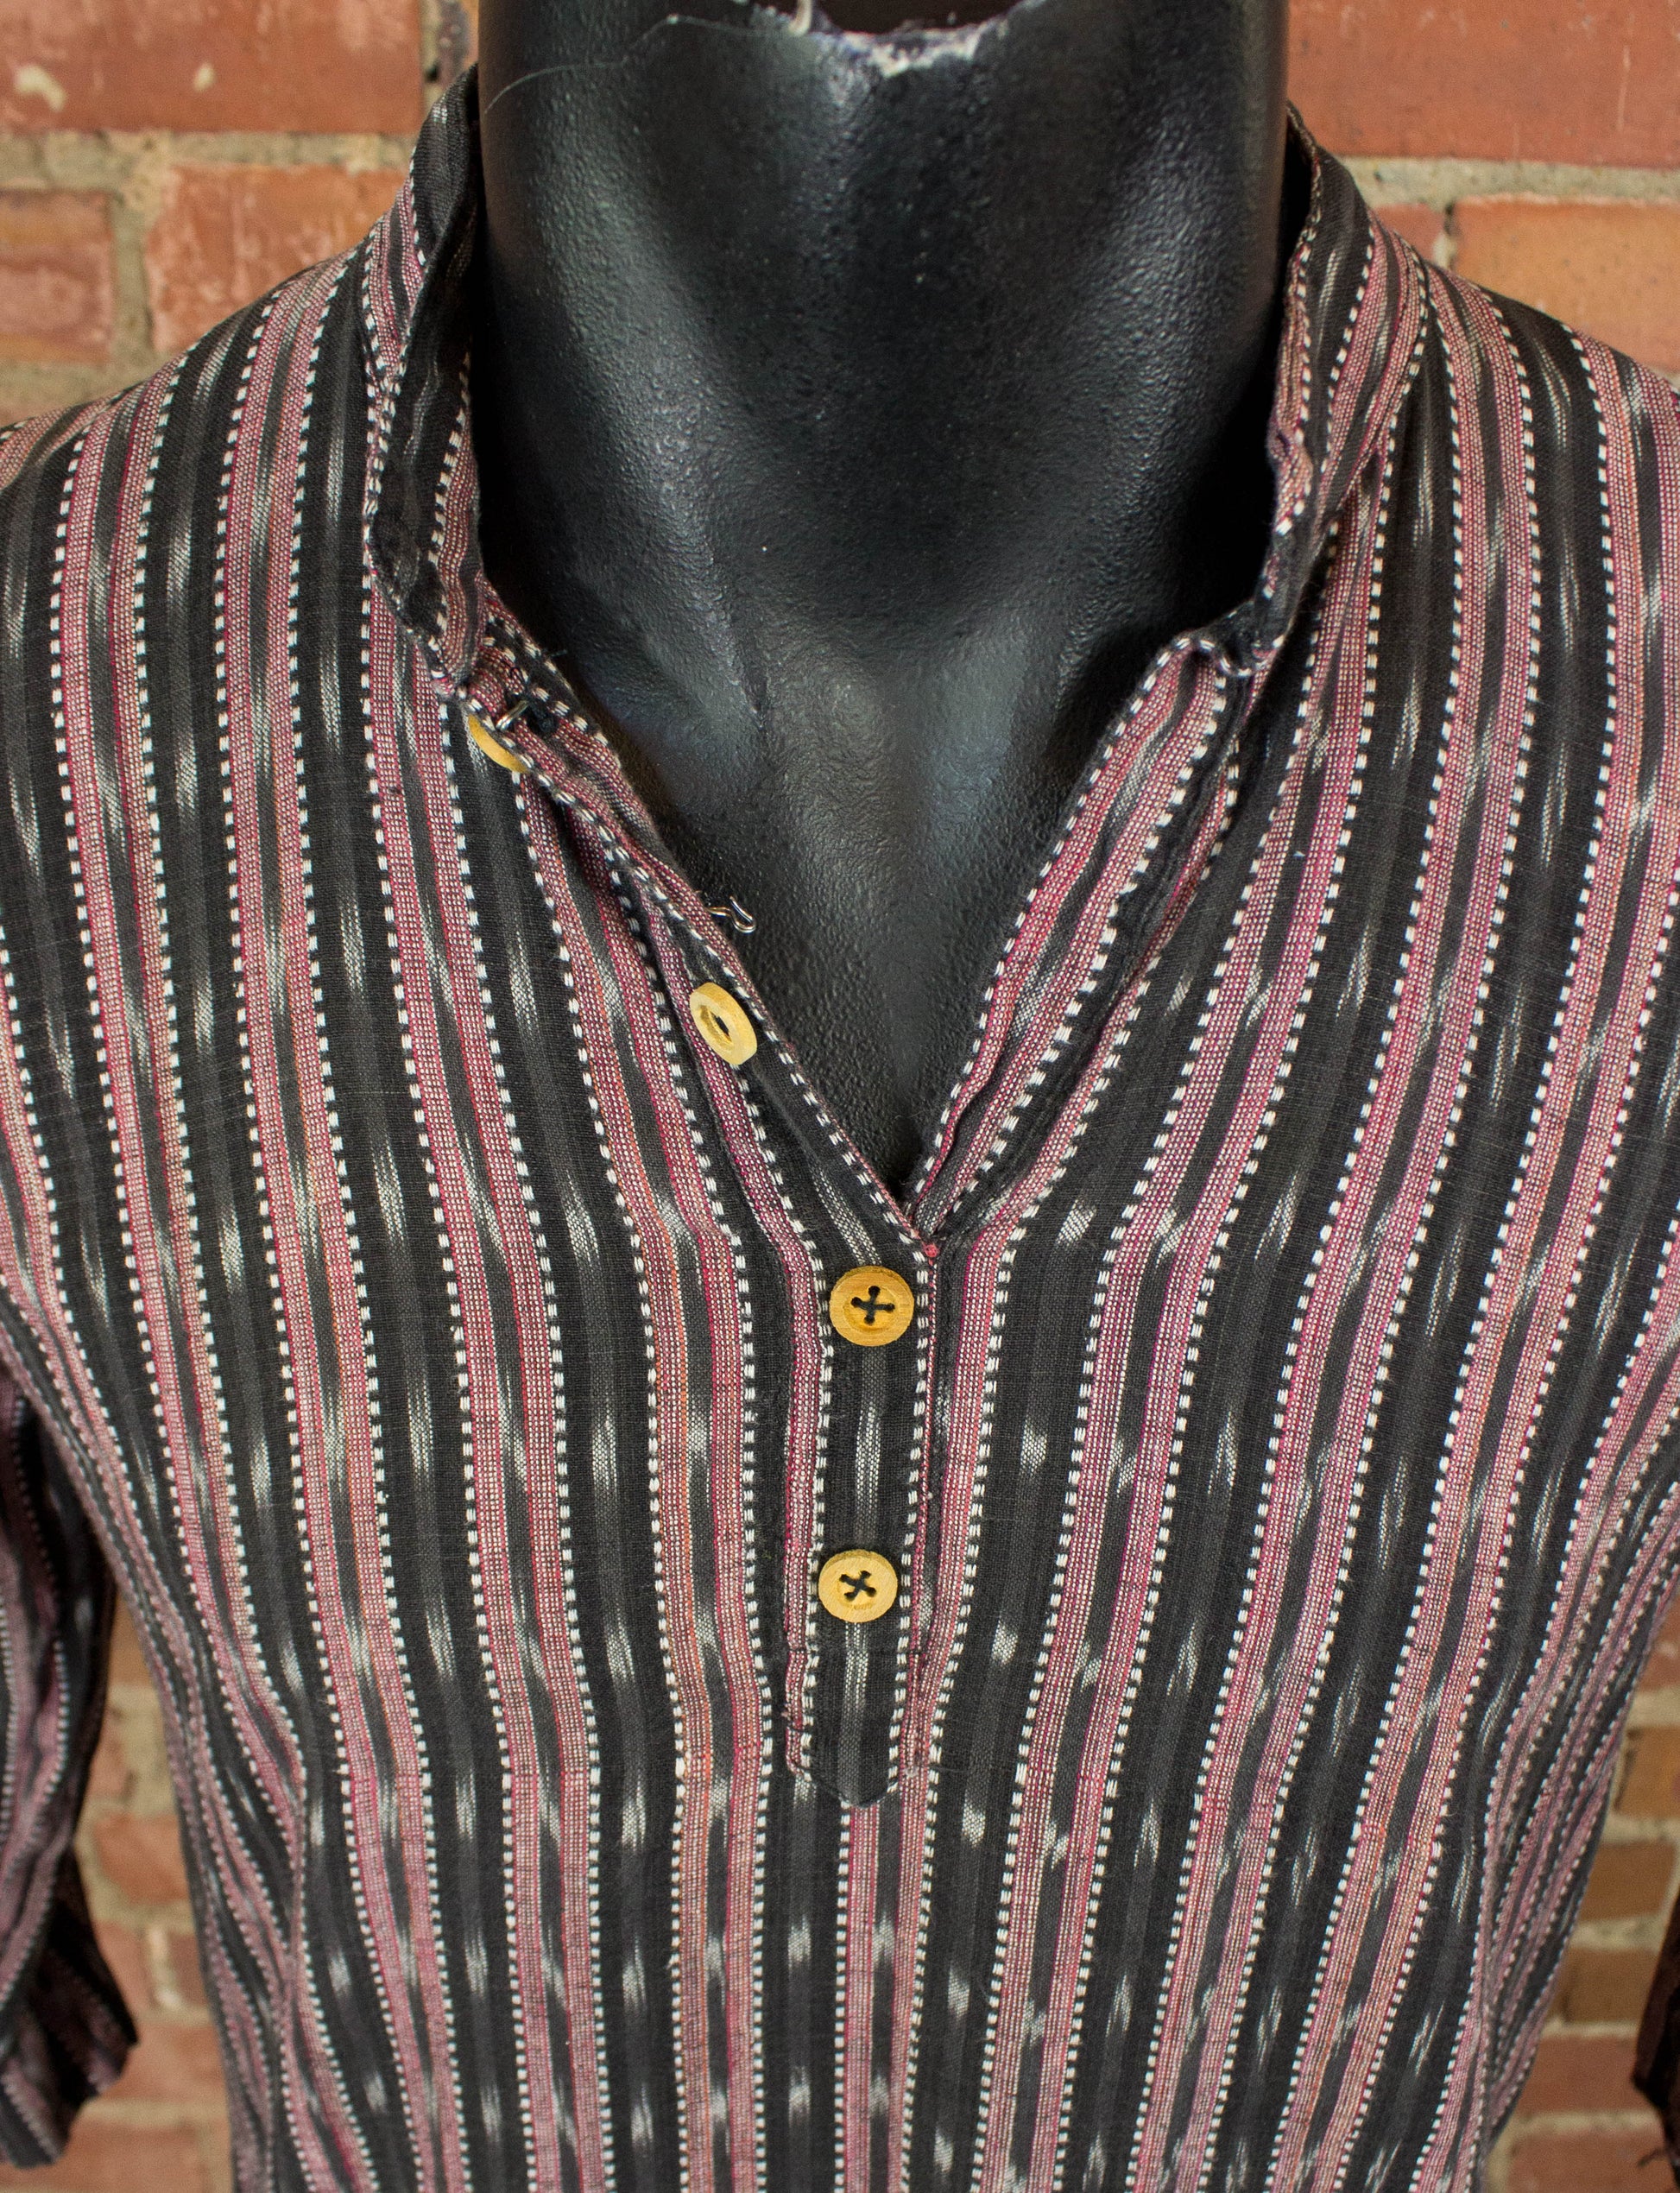 Vintage 70s Black and Red Striped Hippie Blouse Shirt Unisex Small